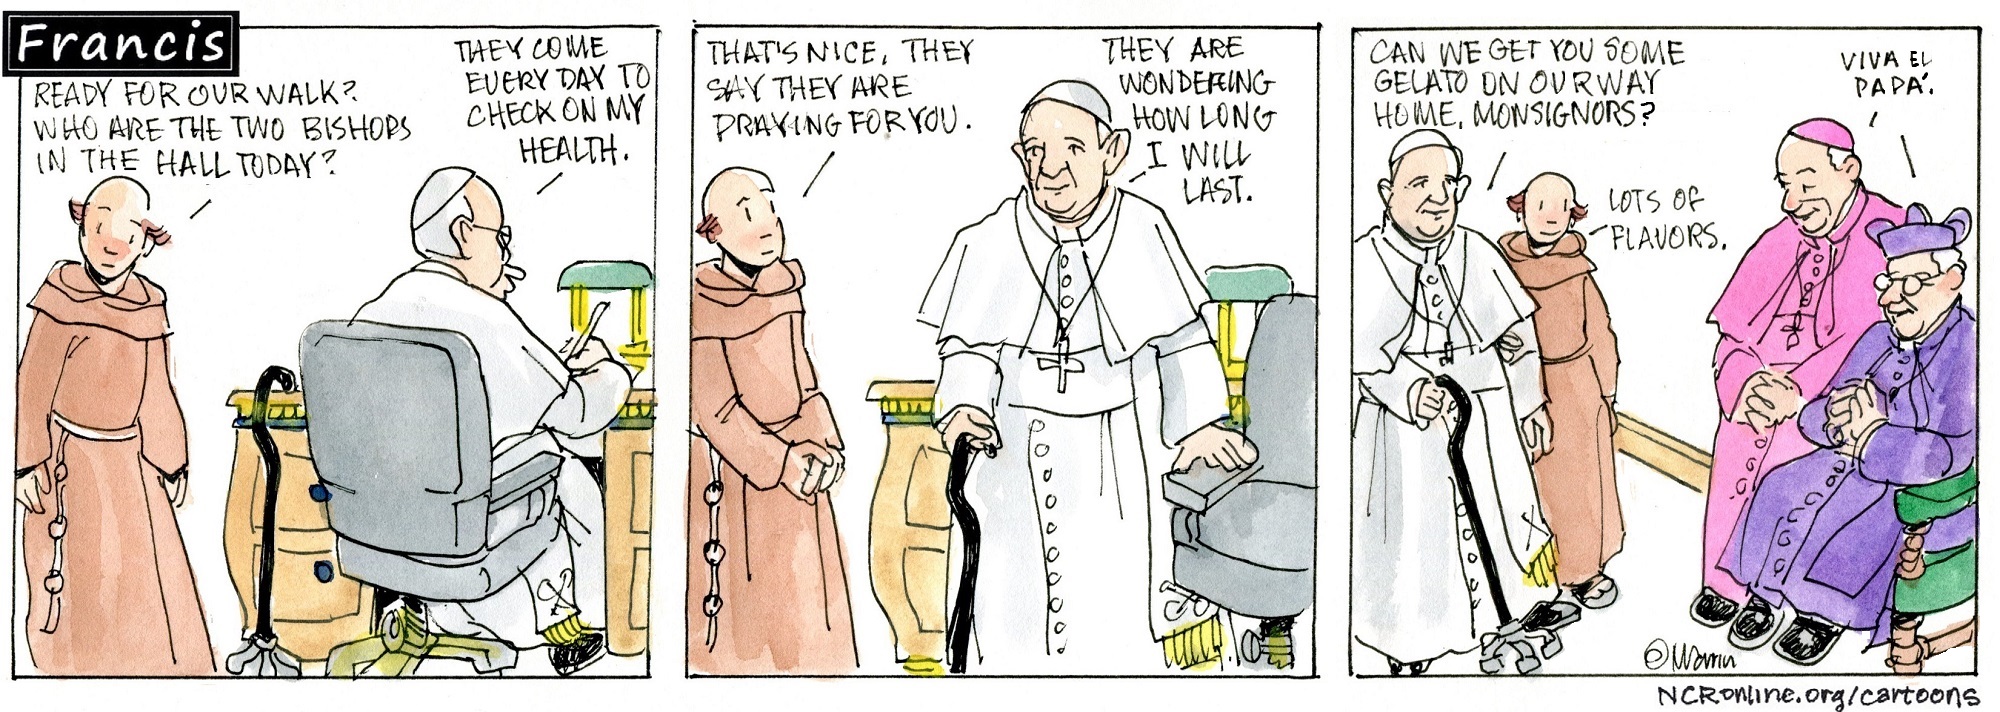 Francis, the comic strip: Two bishops visit Francis every day to check on his health. So thoughtful!